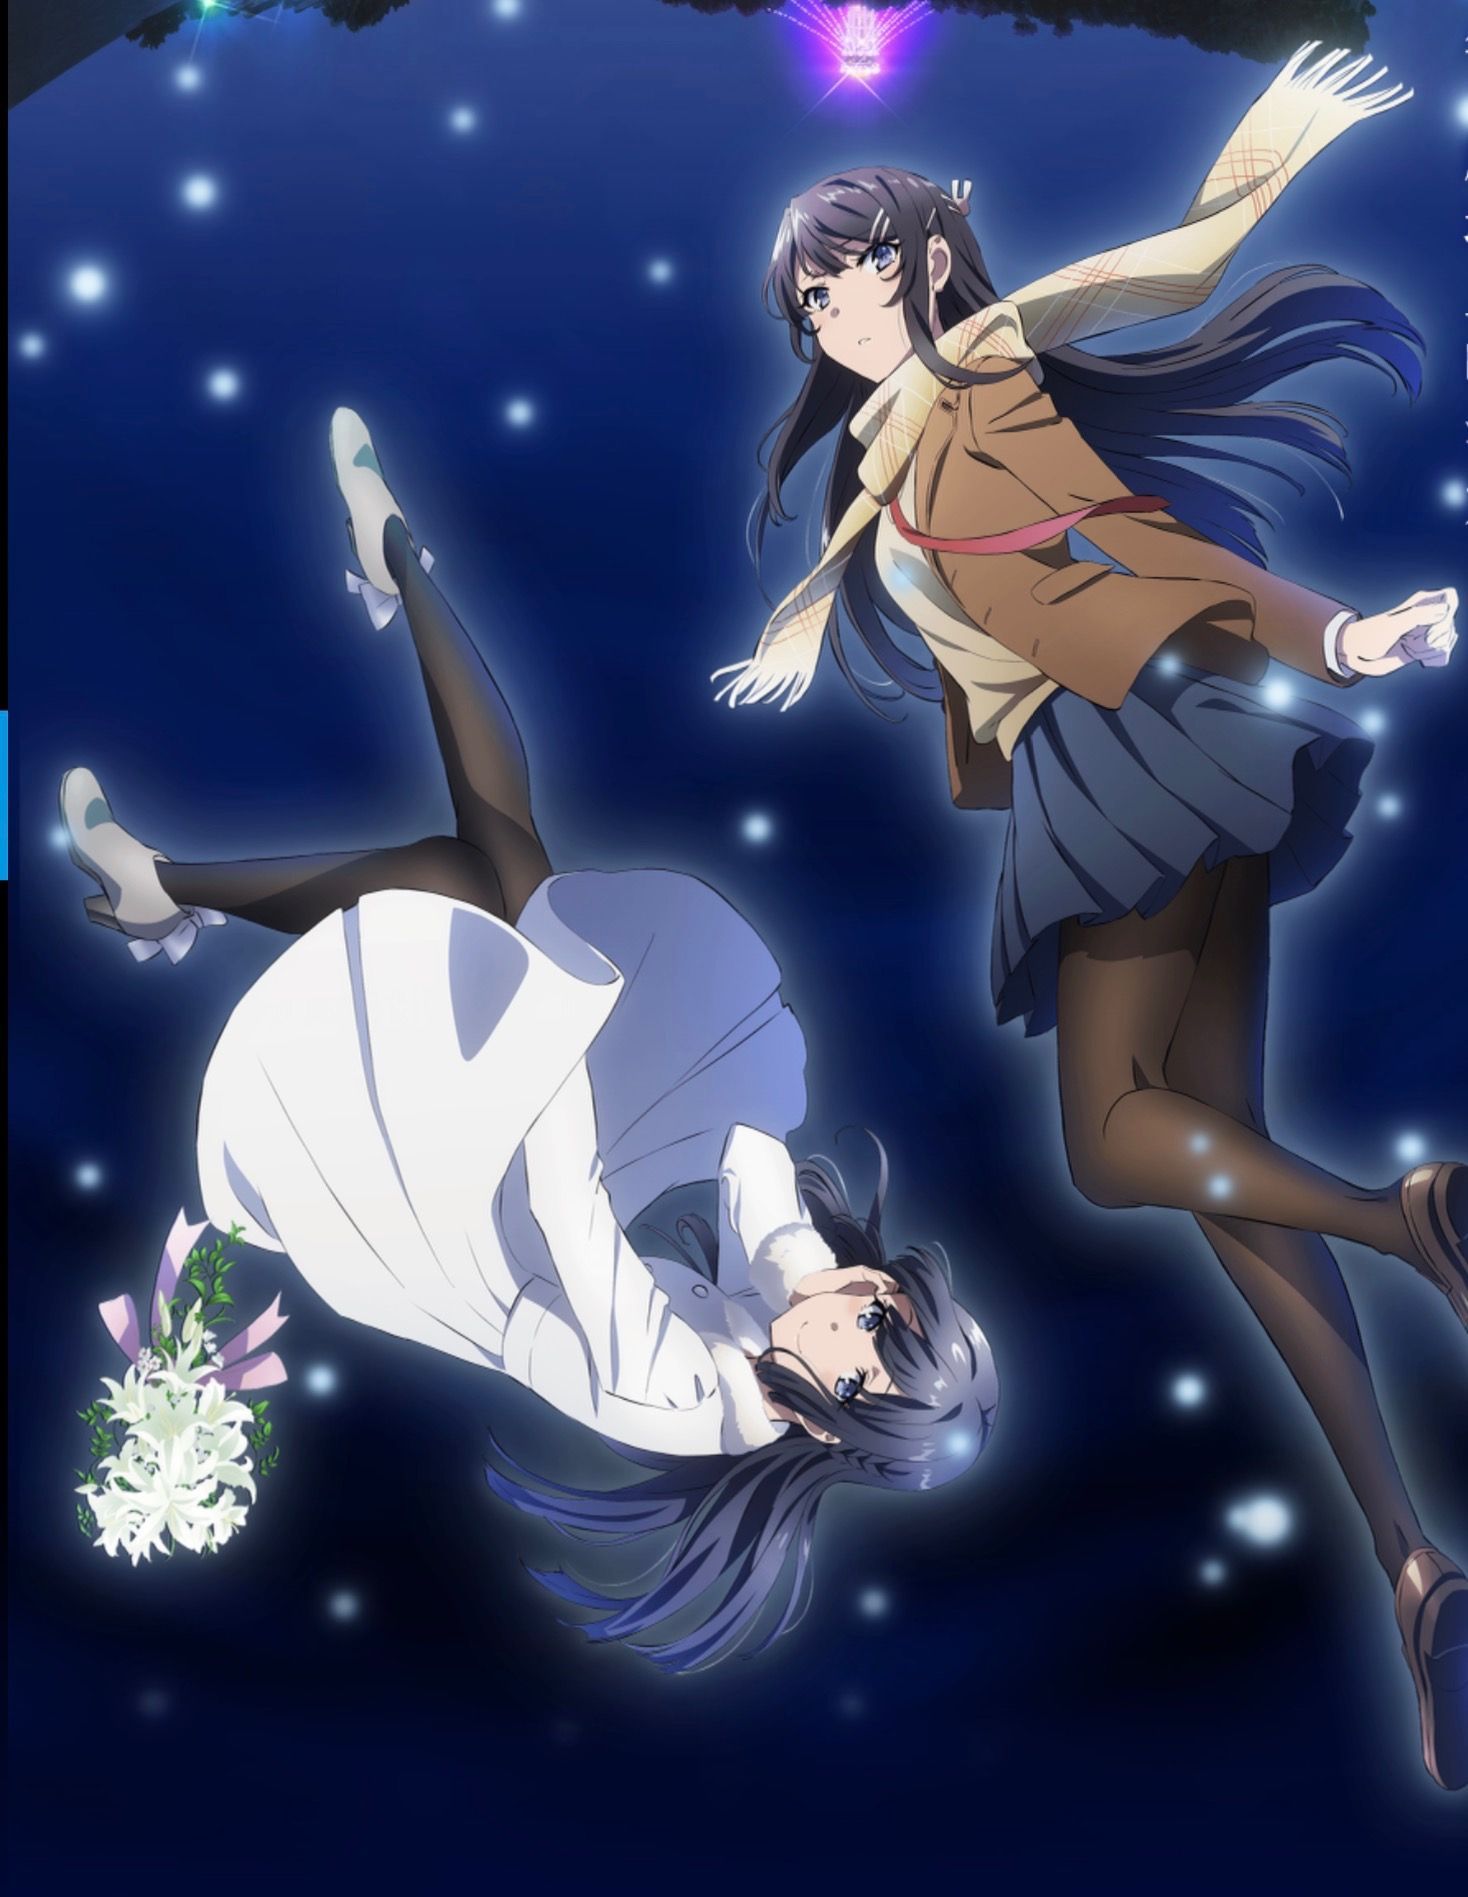 Image Result For Rascal Does Not Dream Of Bunny Girl Senpai Art